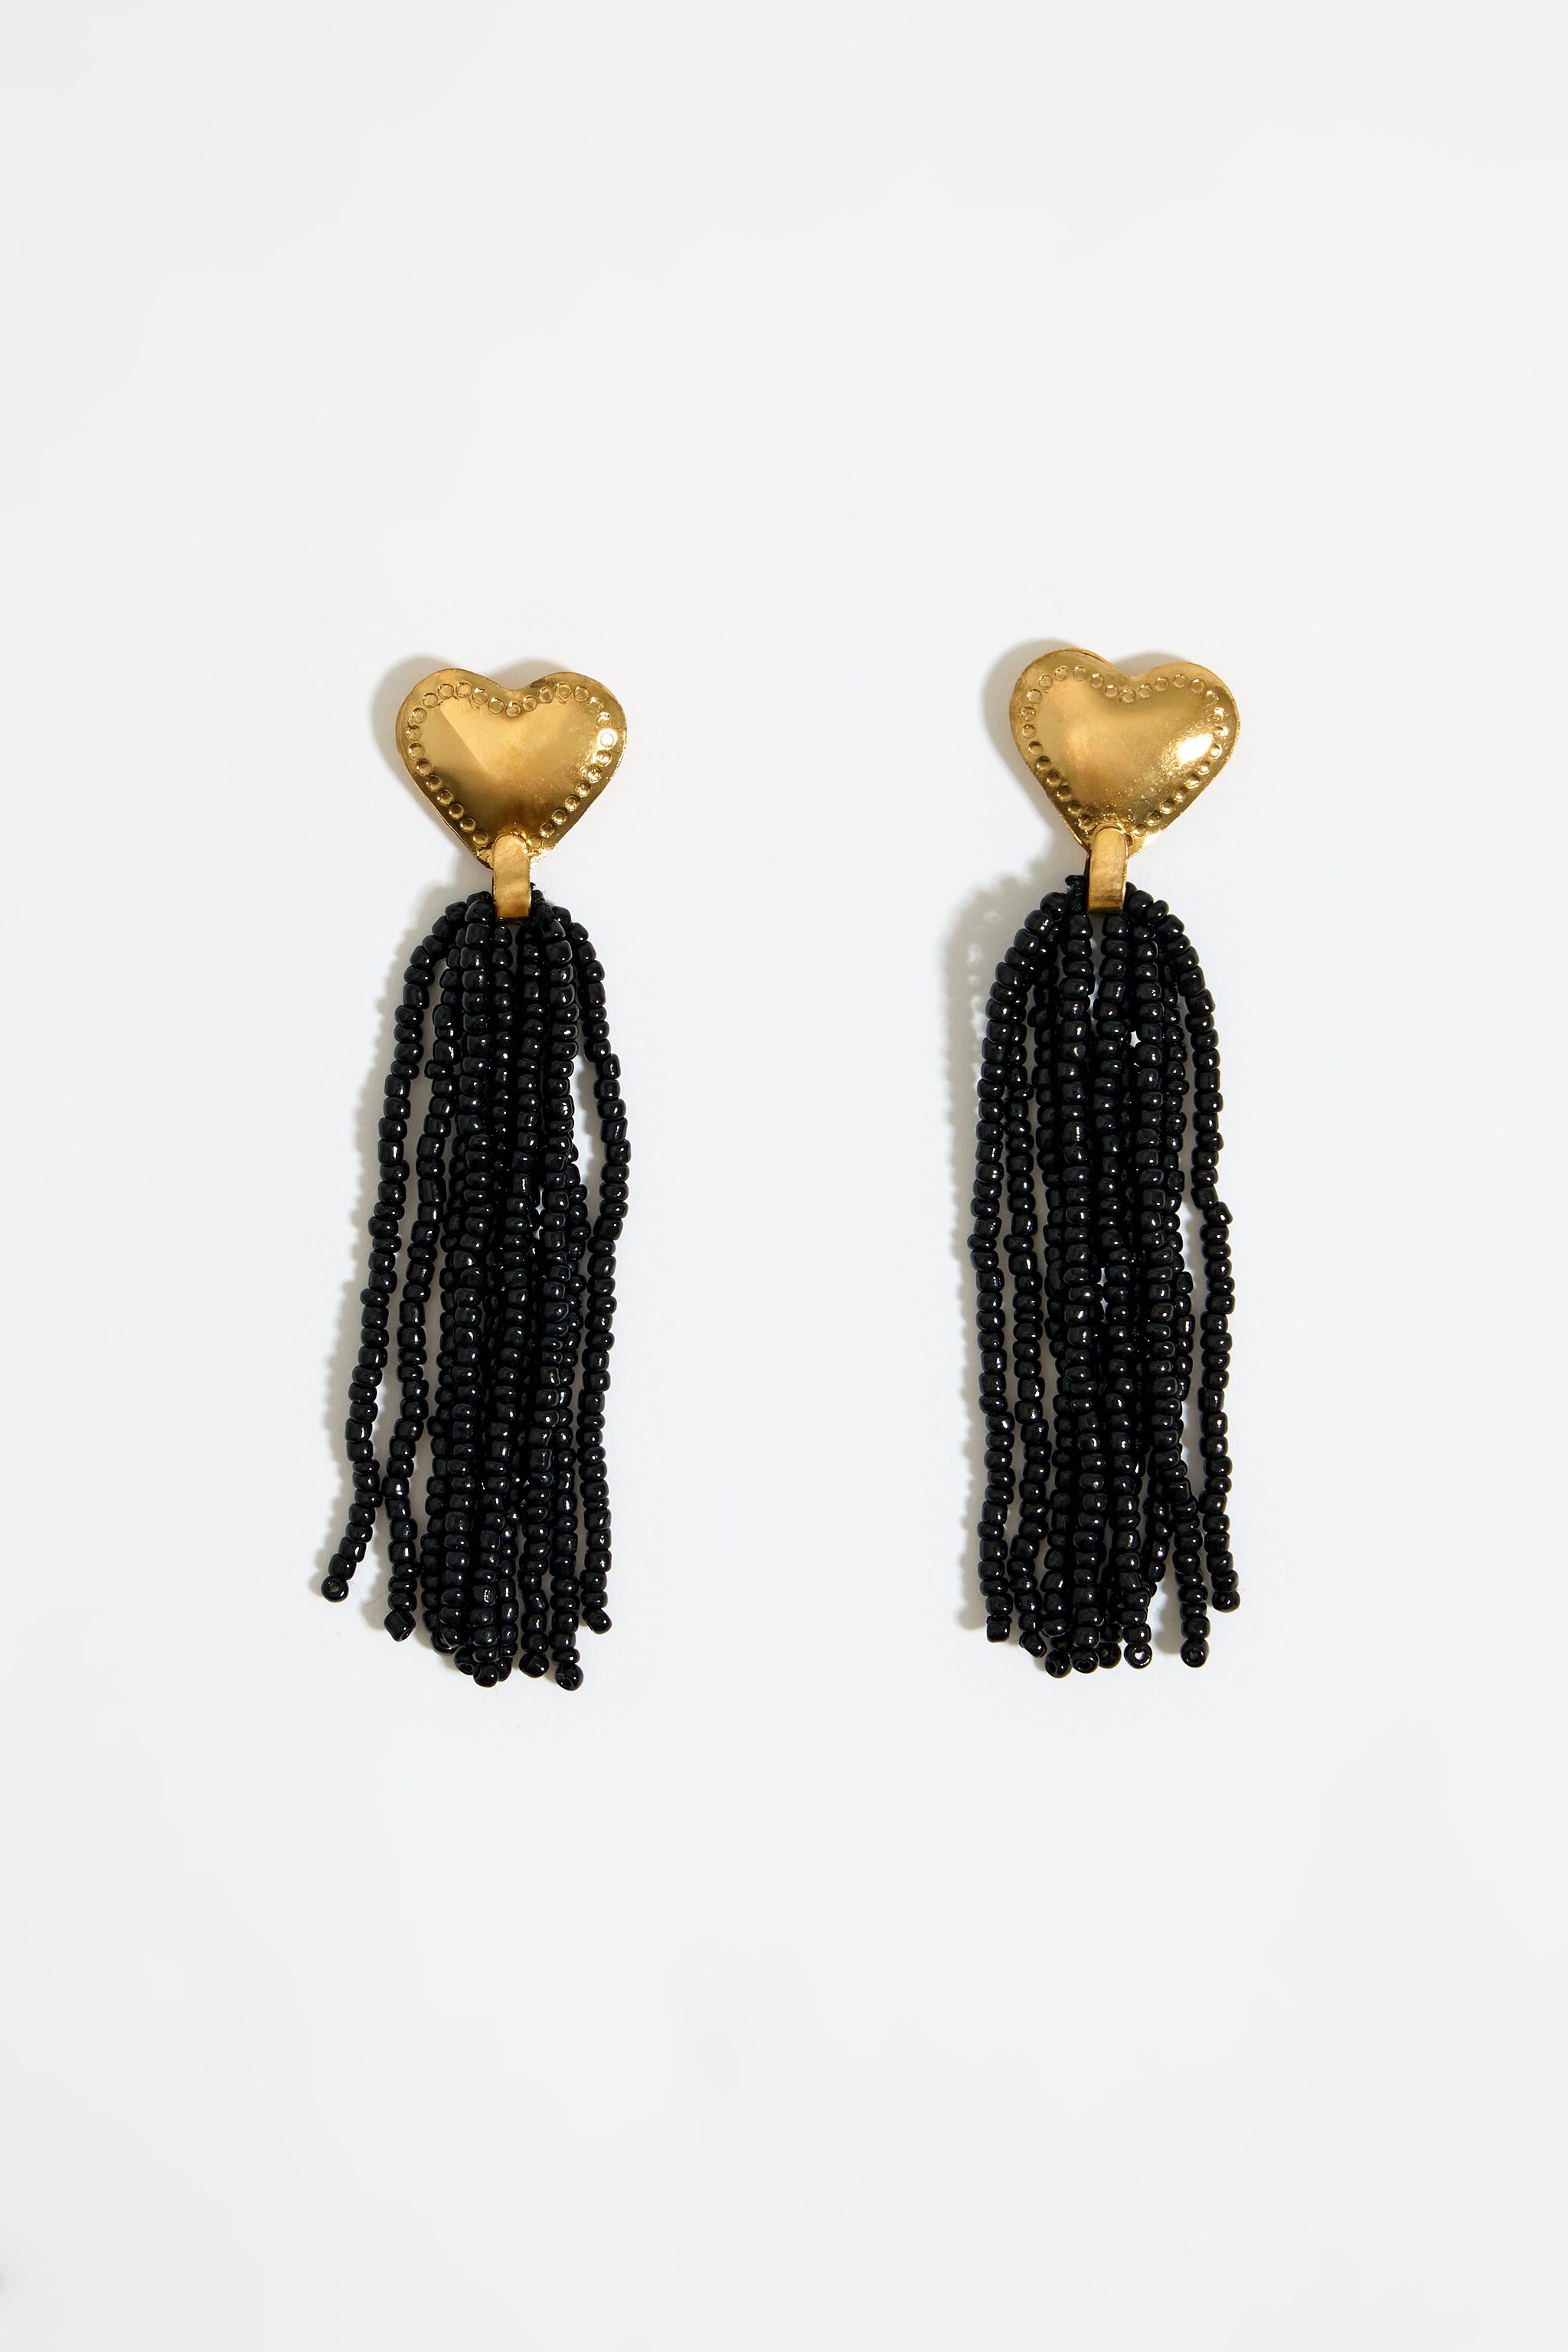 Heishi Beaded Earrings in Black and Gold – WildDaisybyTracy